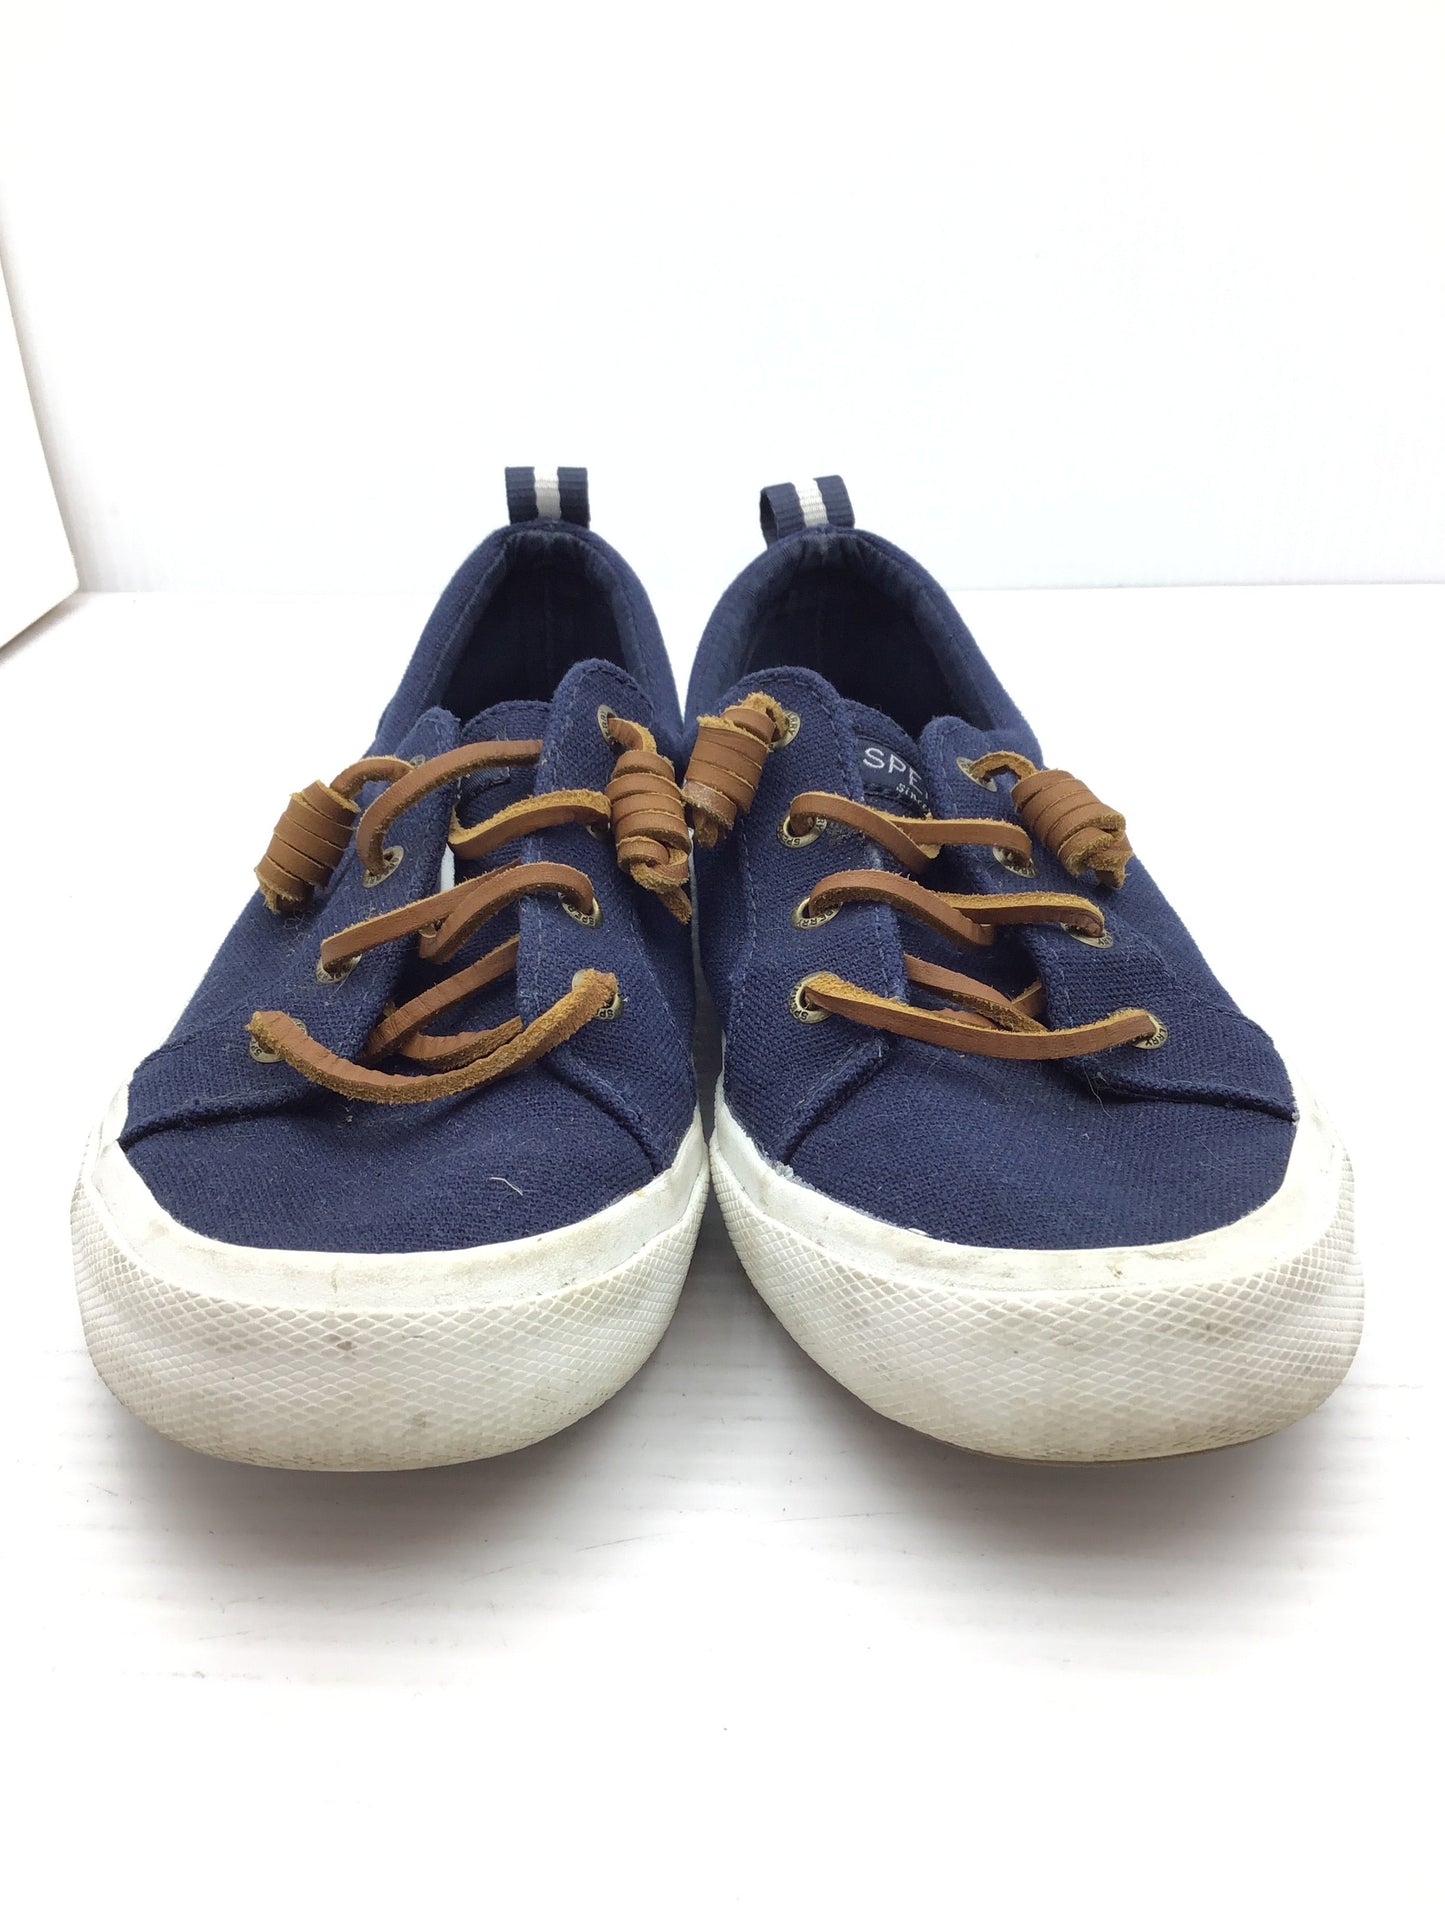 Shoes Sneakers By Sperry  Size: 7